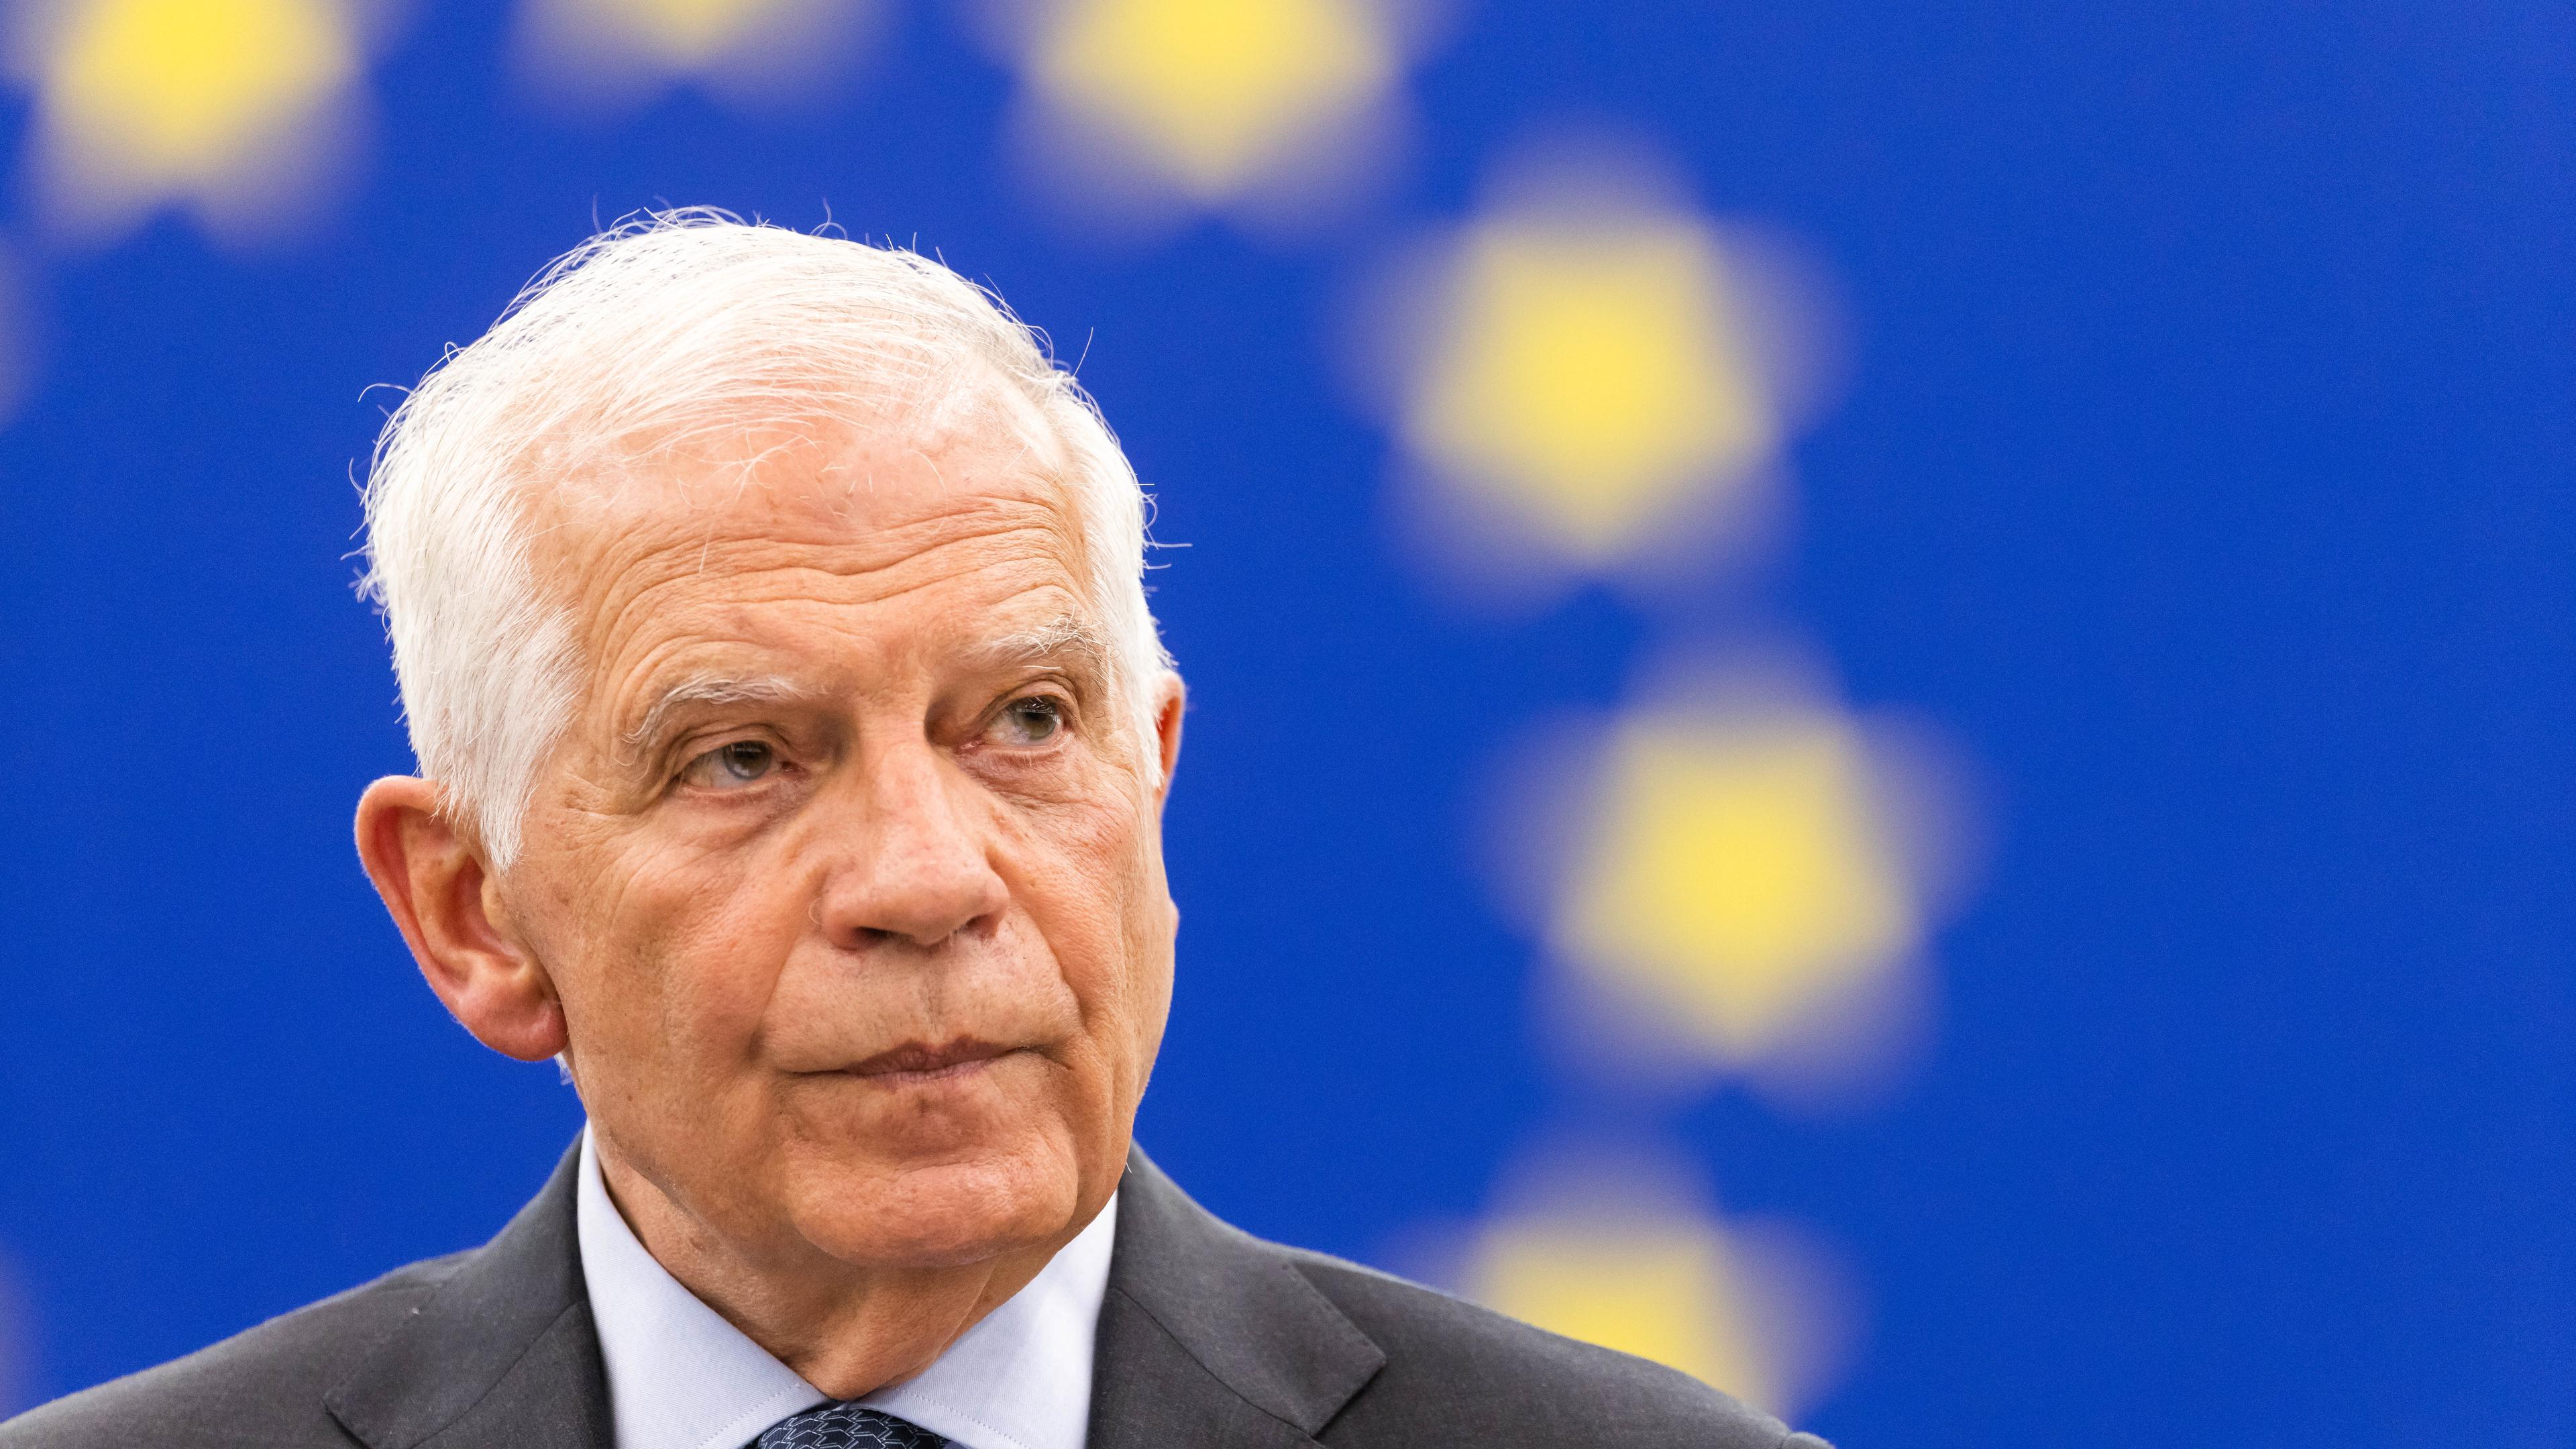 Josep Borrell, the EU’s top foreign affairs official, told Palestinian premier Mohammad Mustafa that donors must increase the support efforts to implement necessary reforms